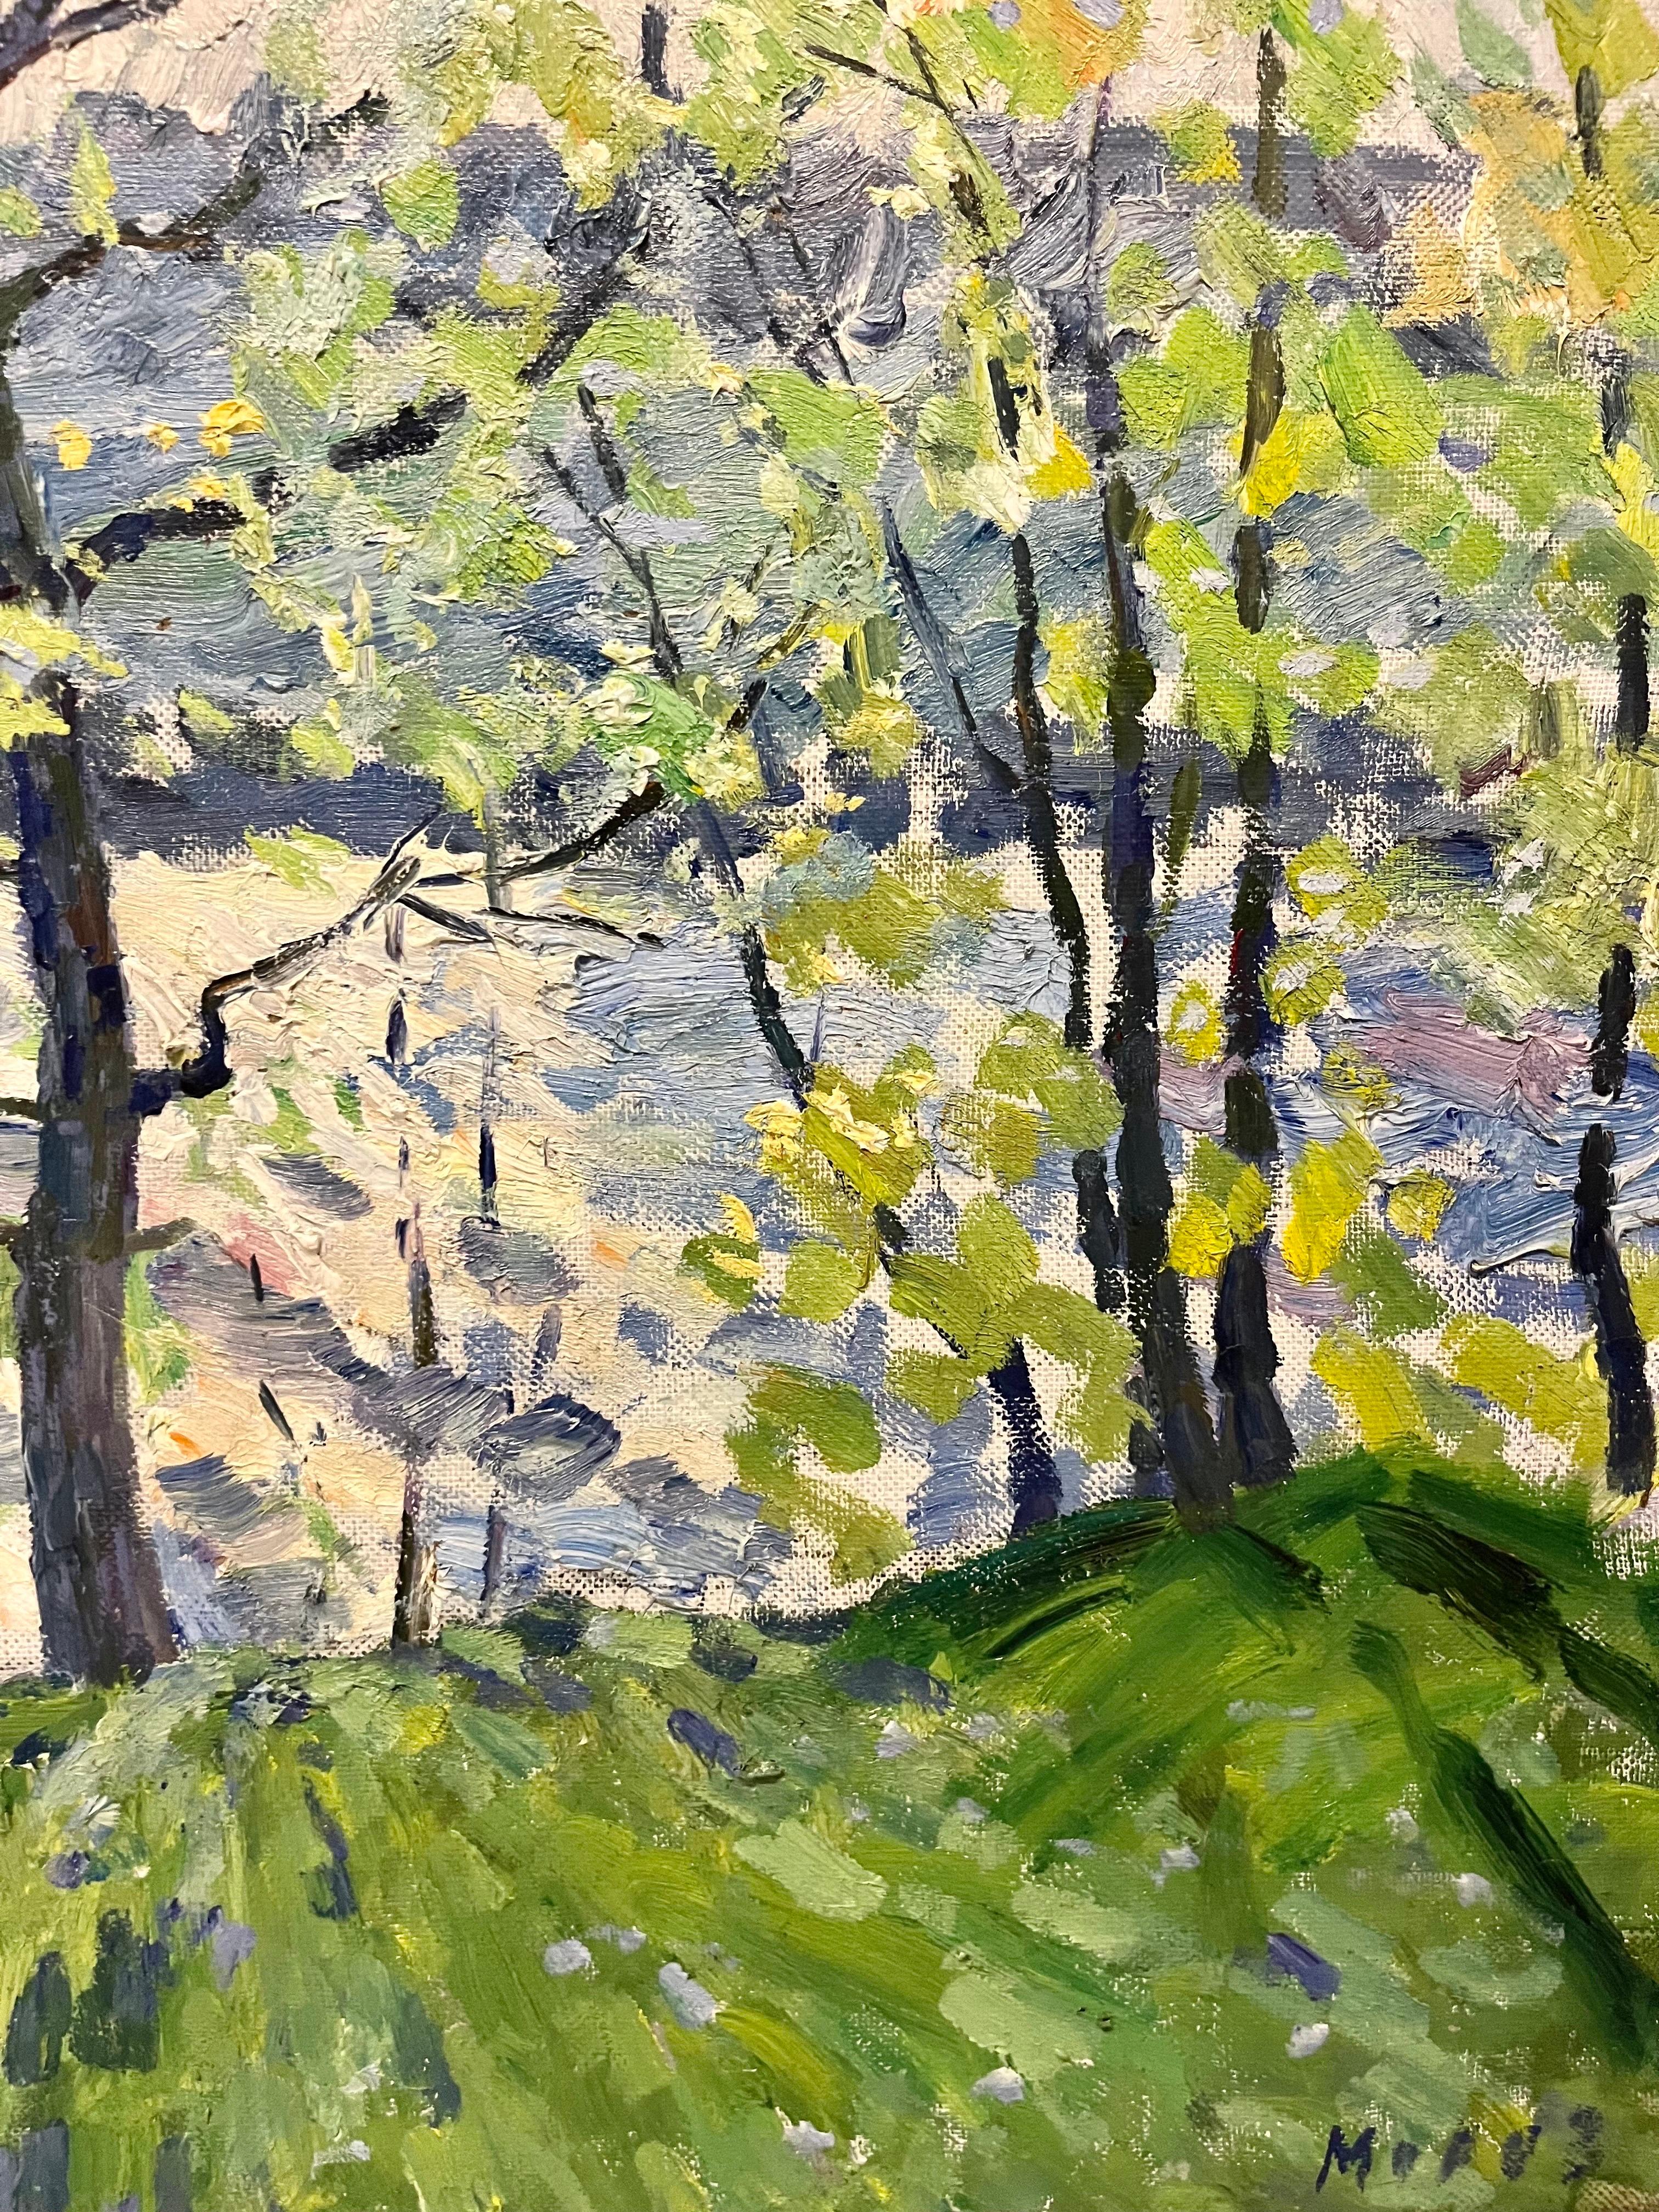 Sun, Light, Trees, Green, Spring, Yellow, River,
Georgij MOROZ (Dneprodzerzinsk, Ukraine, 1937 - St. Petersburg, 2015)
MUSEUMS
Moscow, Tret’jakov Gallery
Moscow, USSR Artists Collection
Moscow, The Ministry of Culture Collection
St. Petersburg,